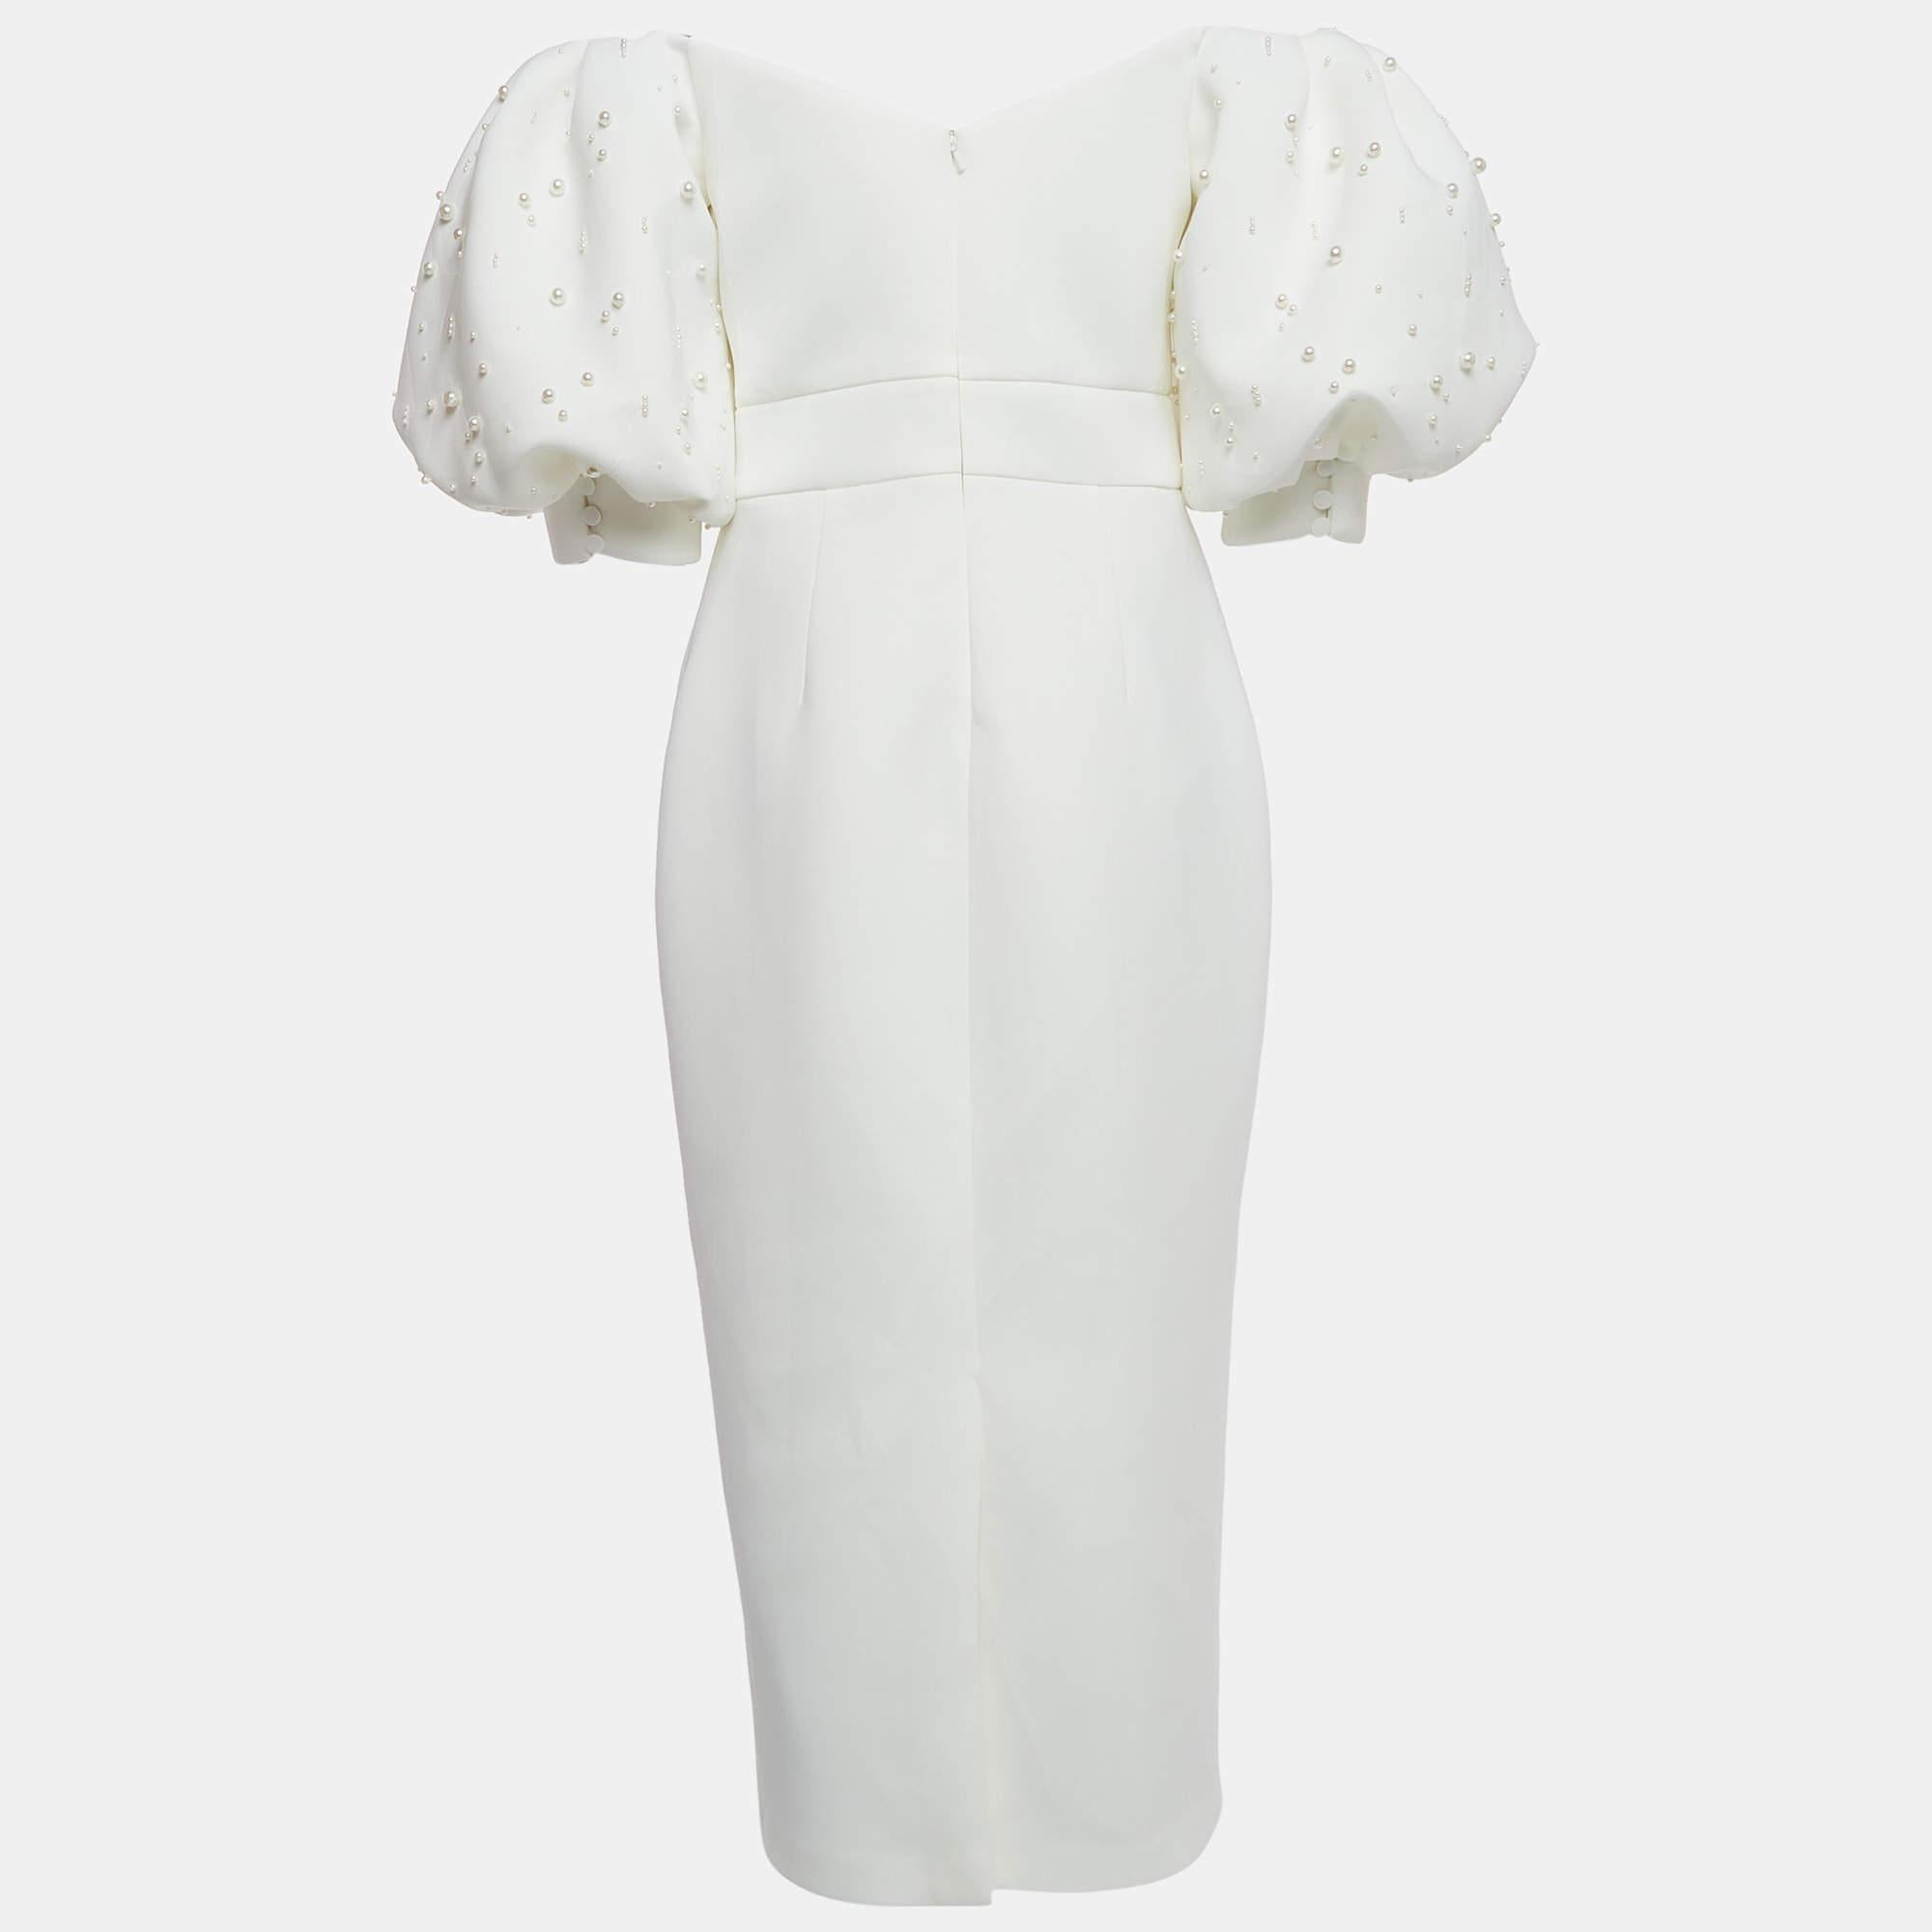 This stylish ivory dress with pearl embellishment exudes elegance and sophistication. Its flattering midi length offers a versatile option for various occasions. Delicate and exquisitely feminine, the dress is perfect for evenings, dates, and even a